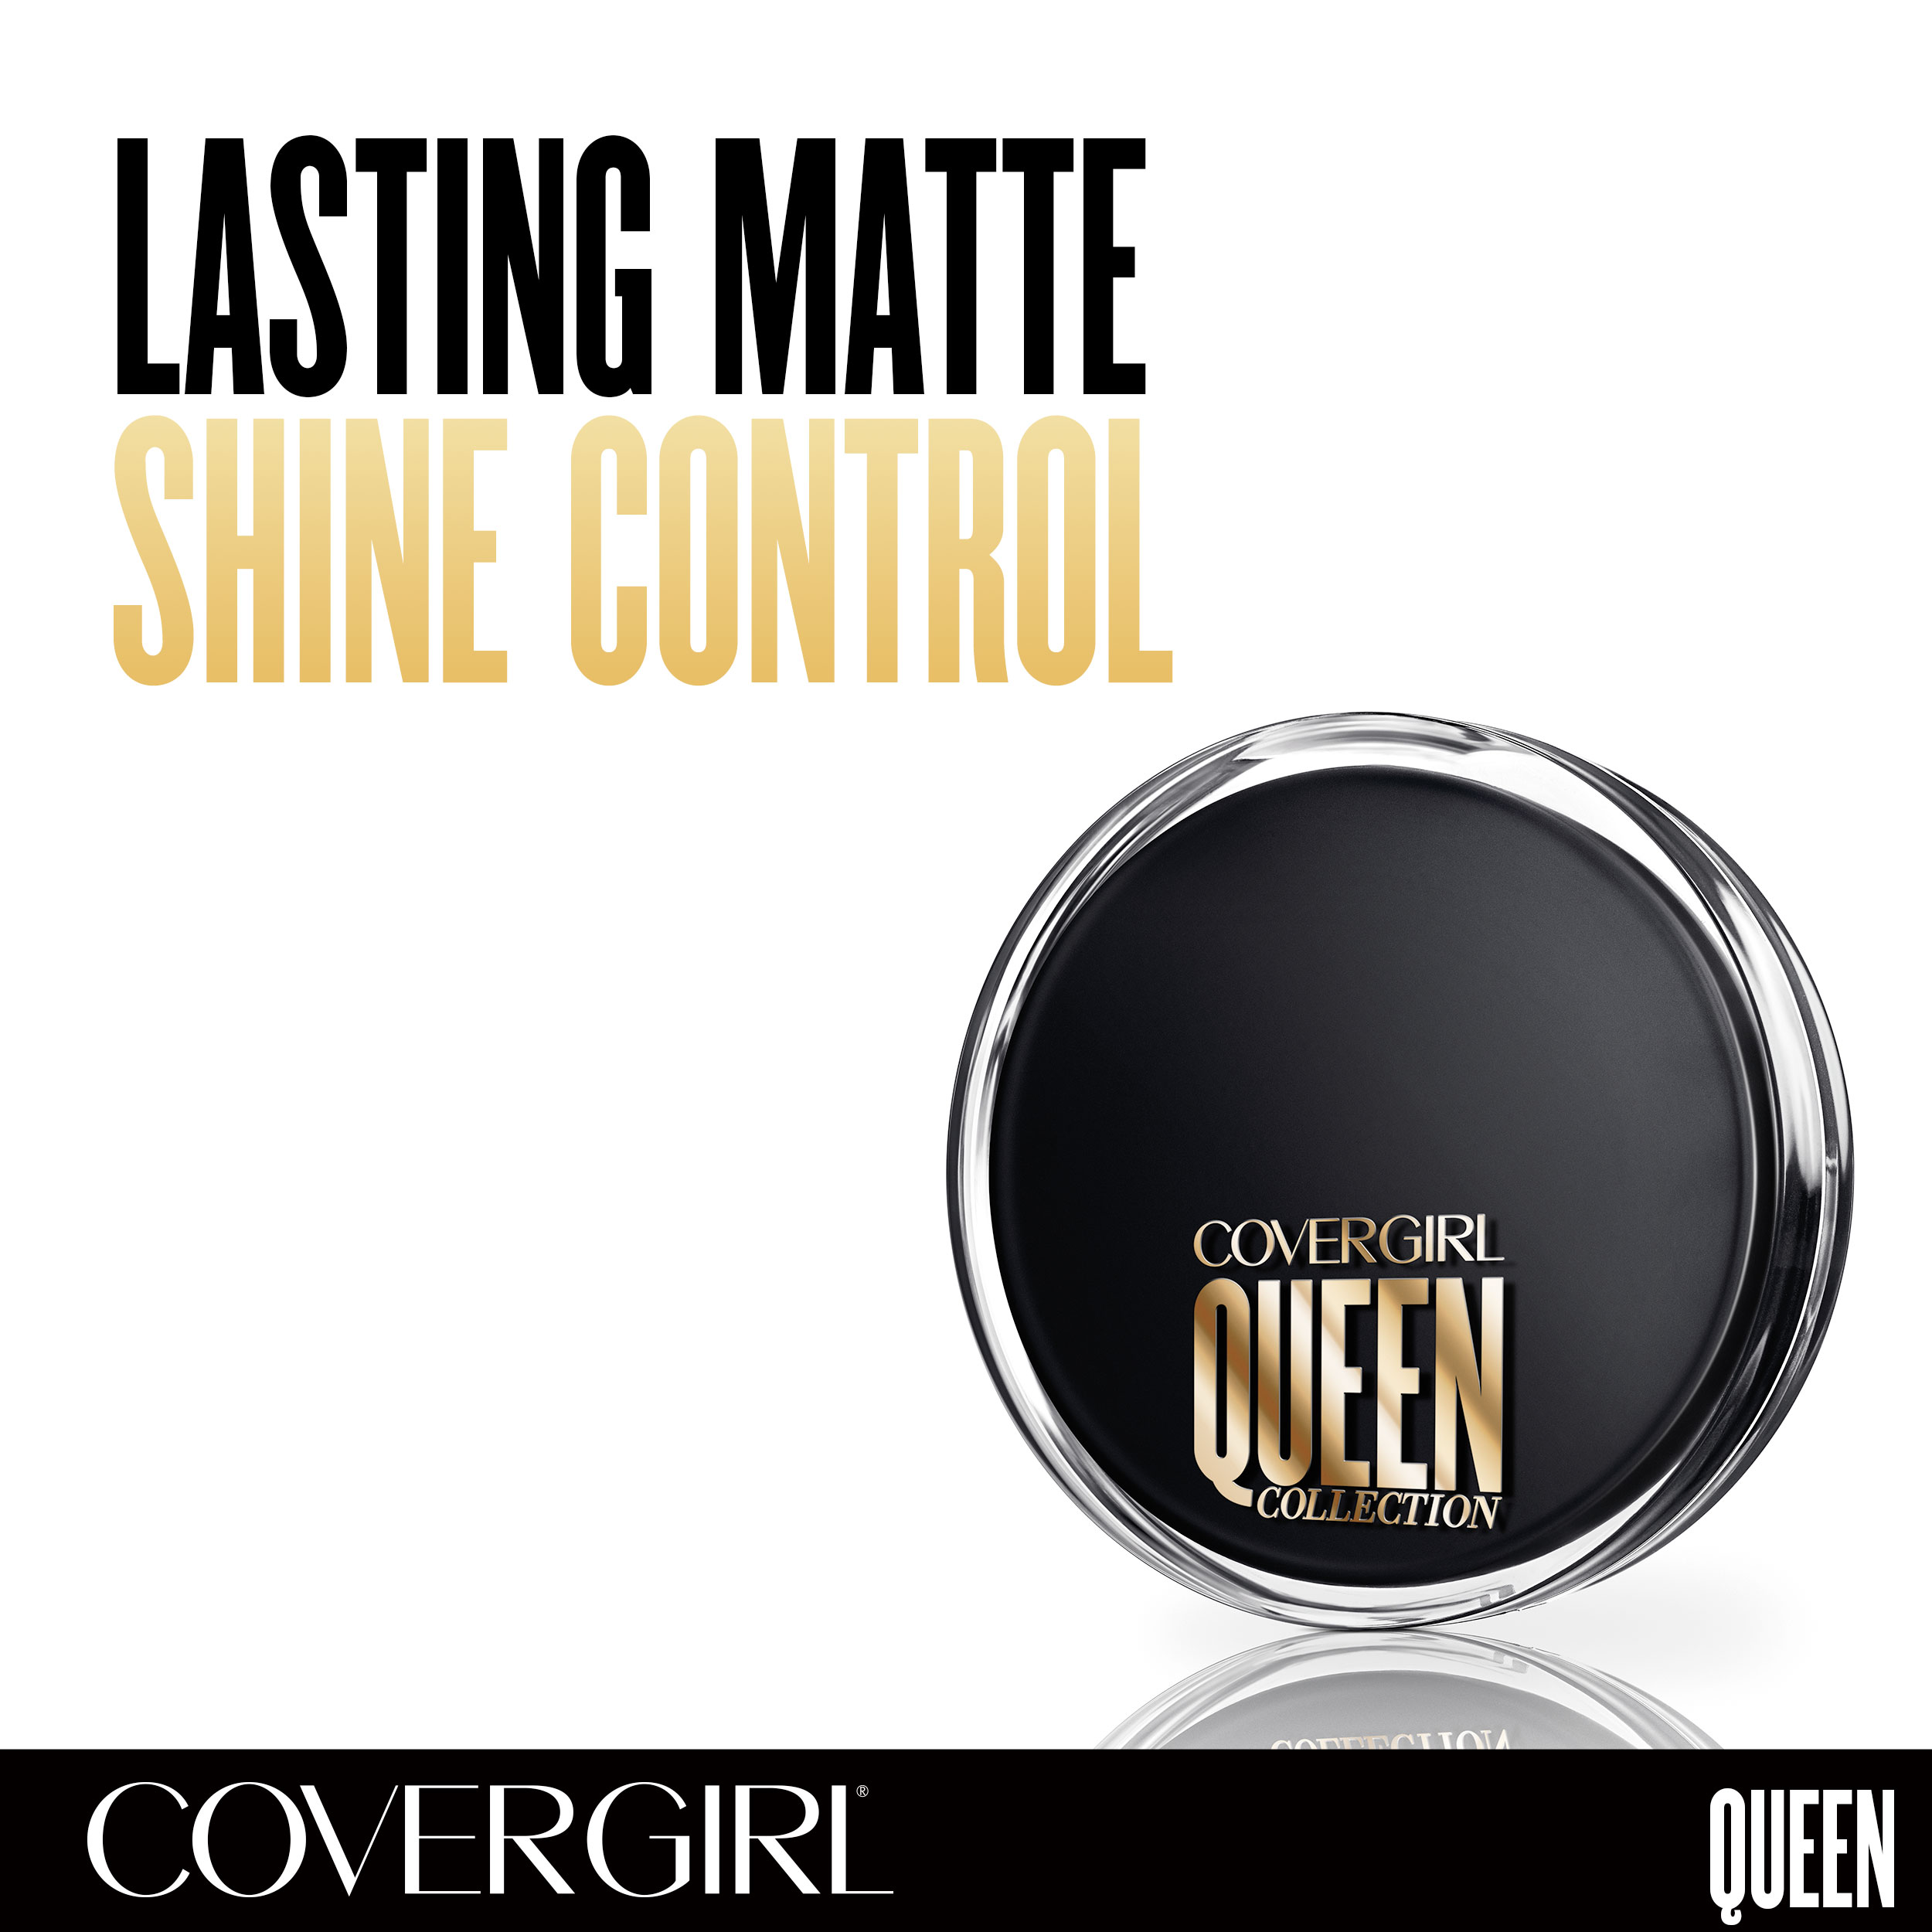 COVERGIRL Queen Lasting Matte Pressed Powder Foundation, Golden - image 4 of 8